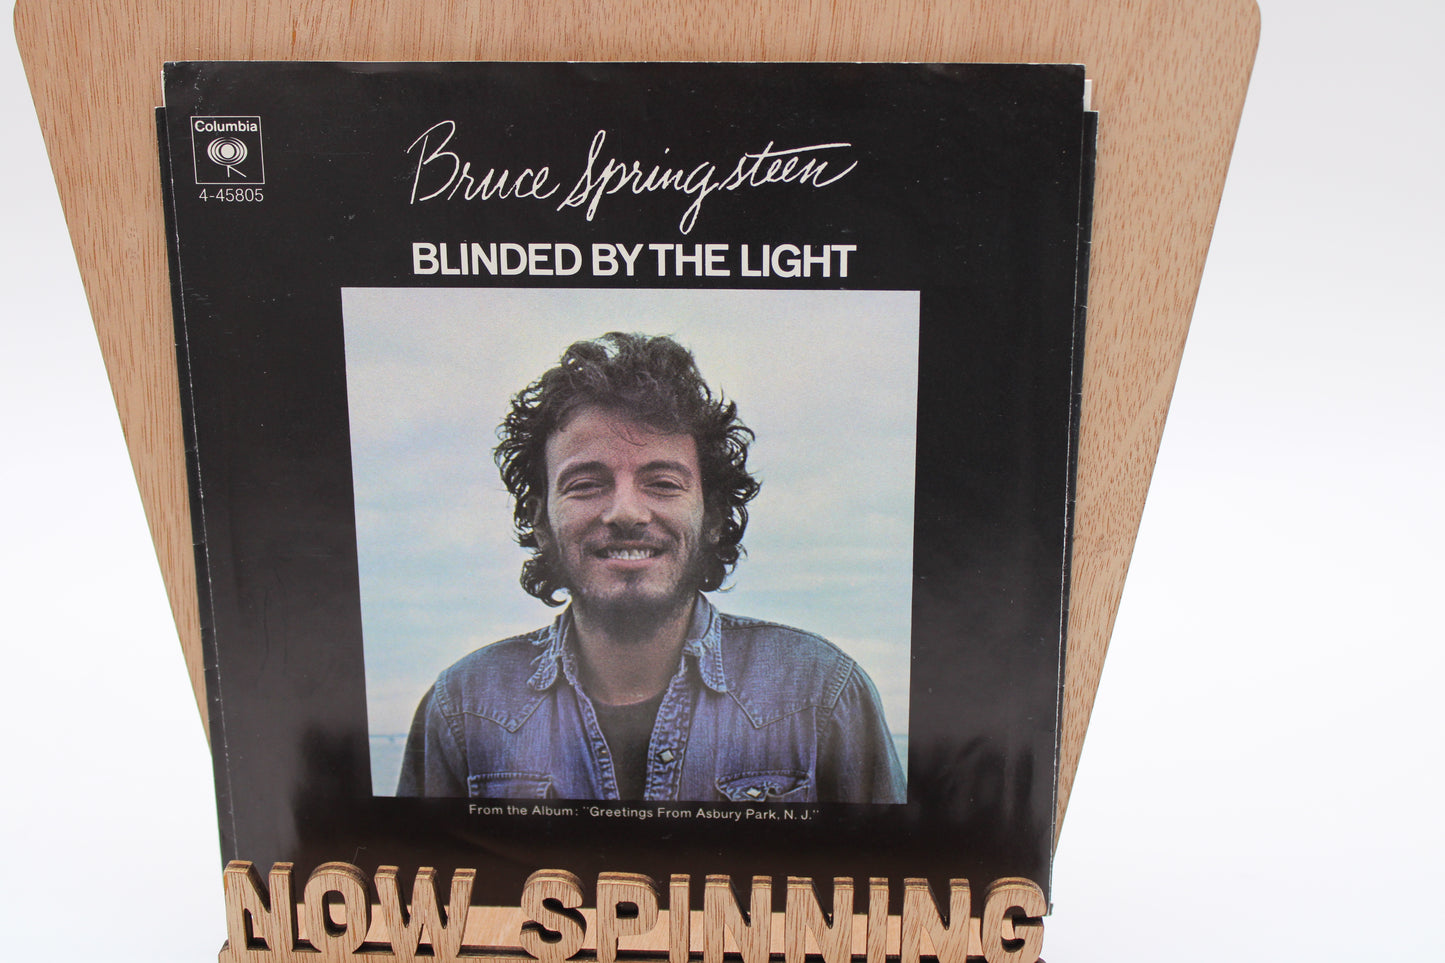 Bruce Springsteen "Blinded By the Light" 45 Vinyl (NM) Columbia Records with Picture Sleeve (EX)